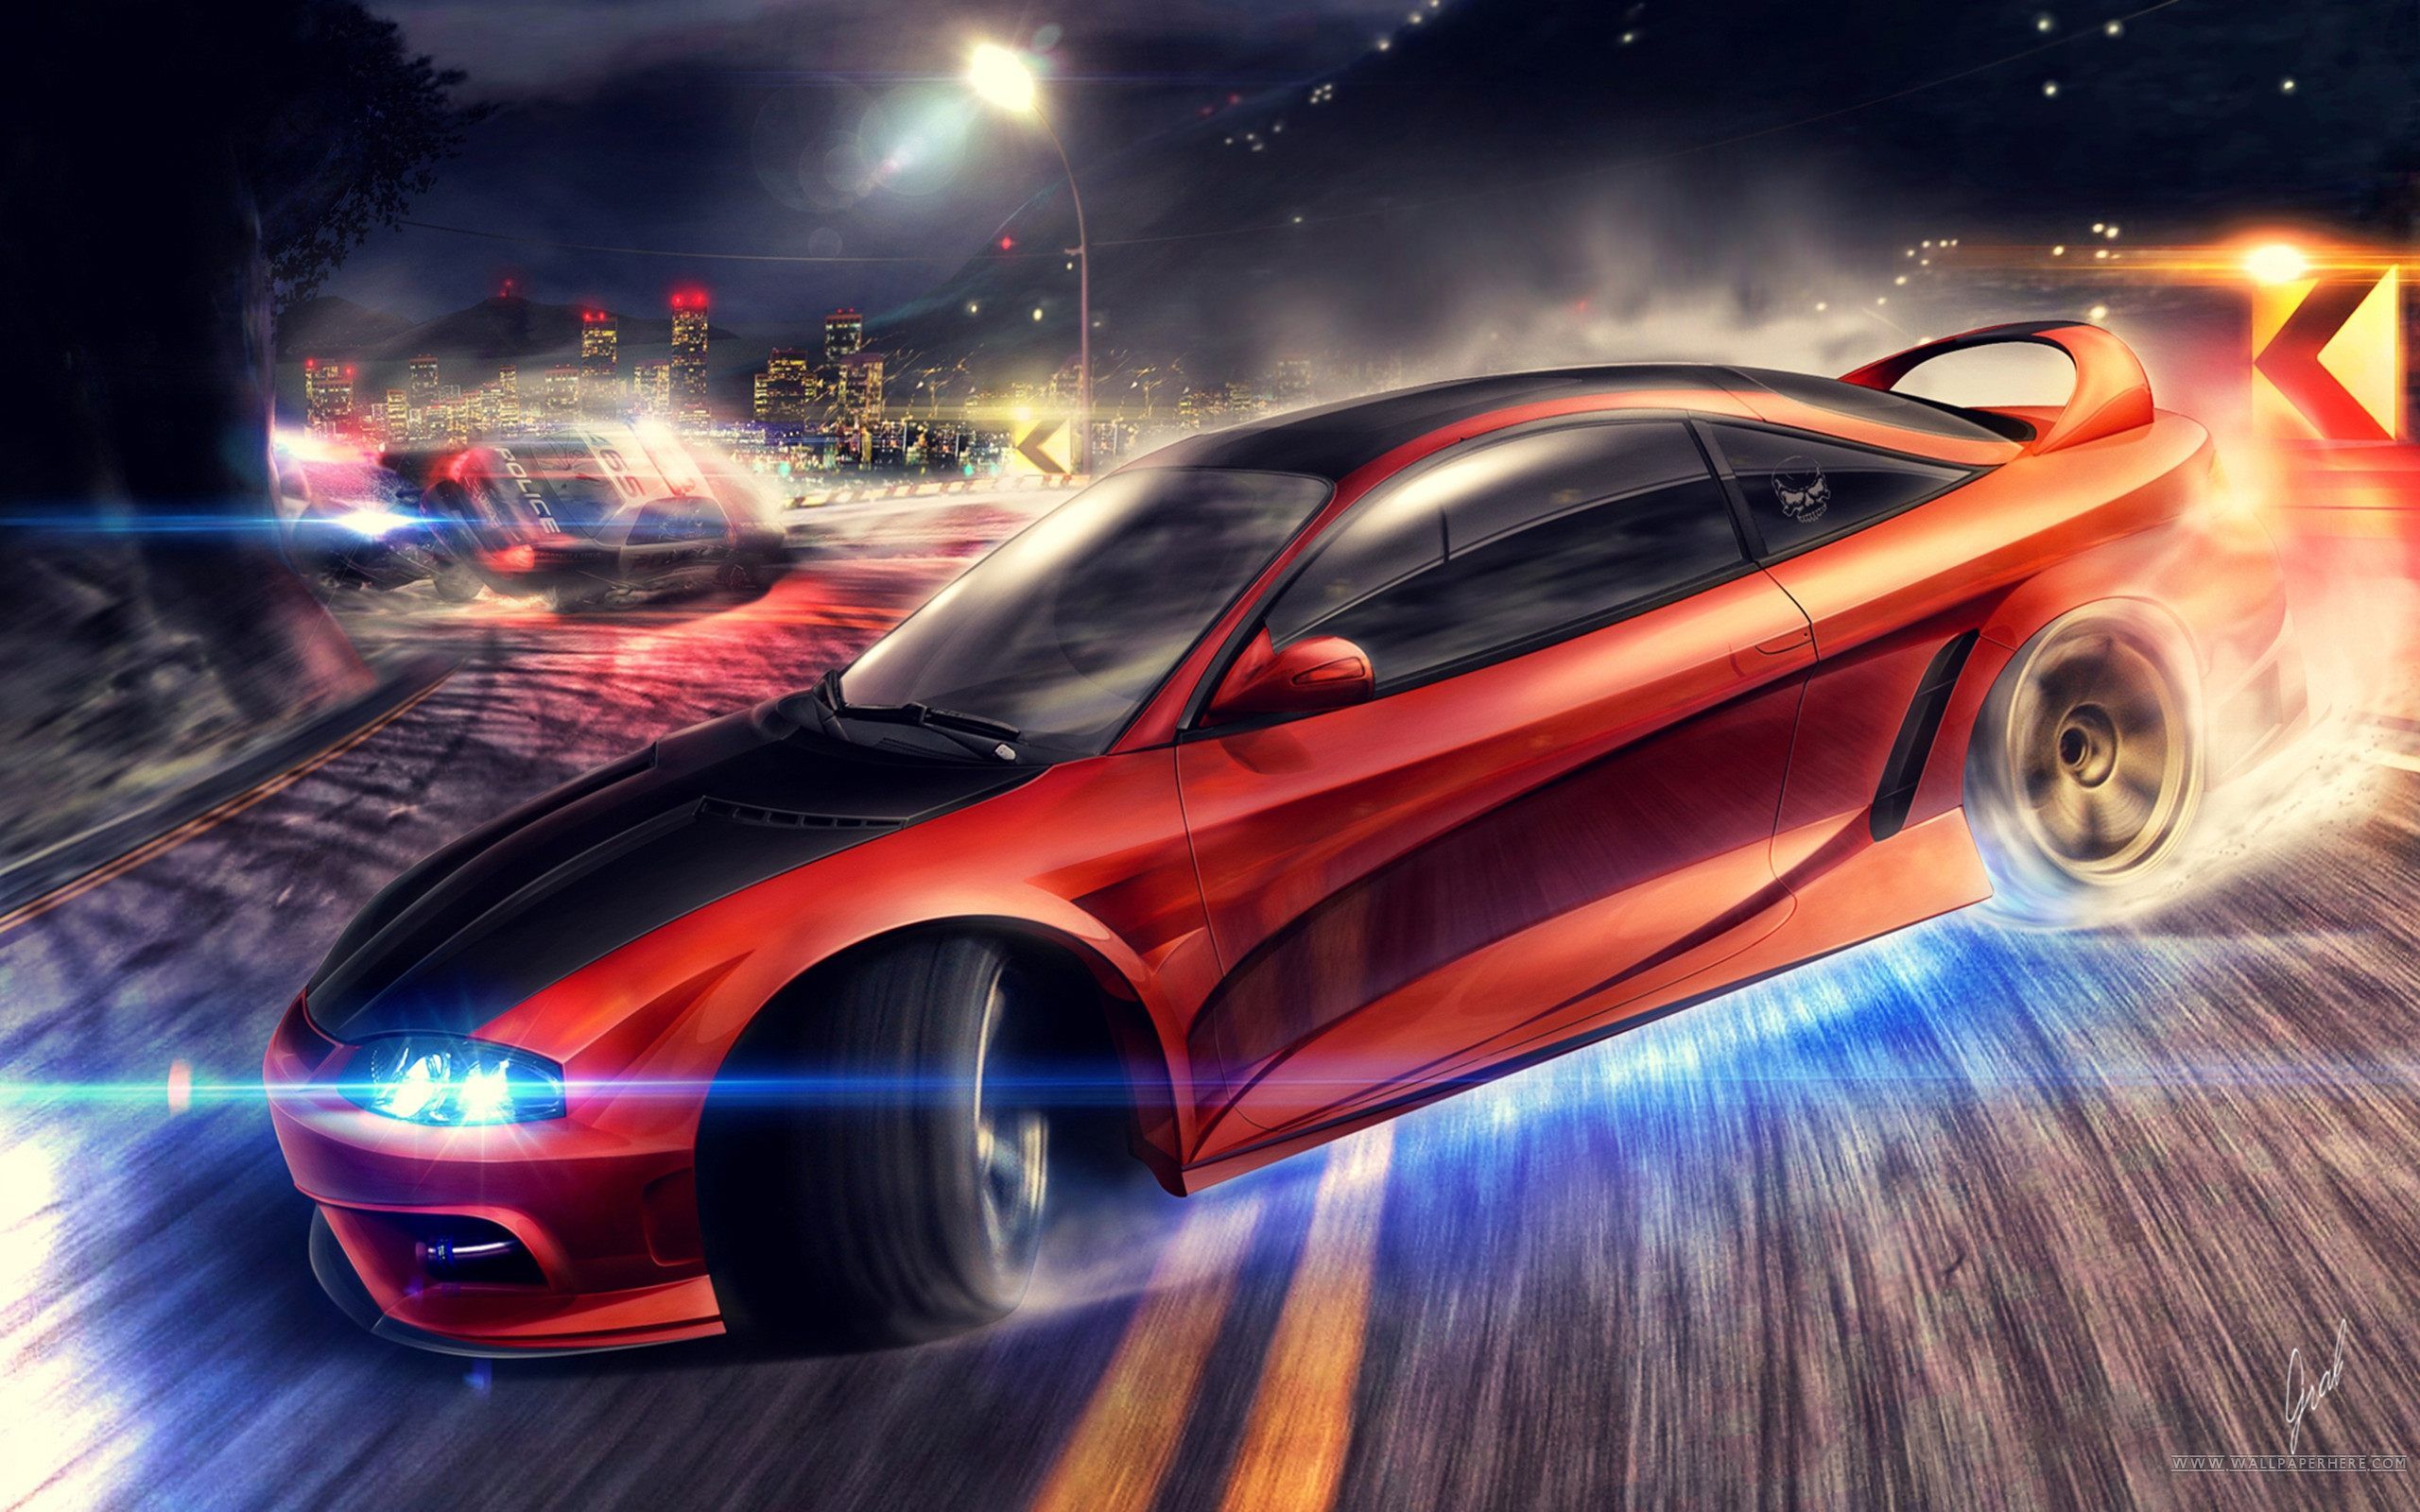 Mobile Phone x Need for speed world Wallpaper HD Desktop. Mitsubishi eclipse, Need for speed, World wallpaper